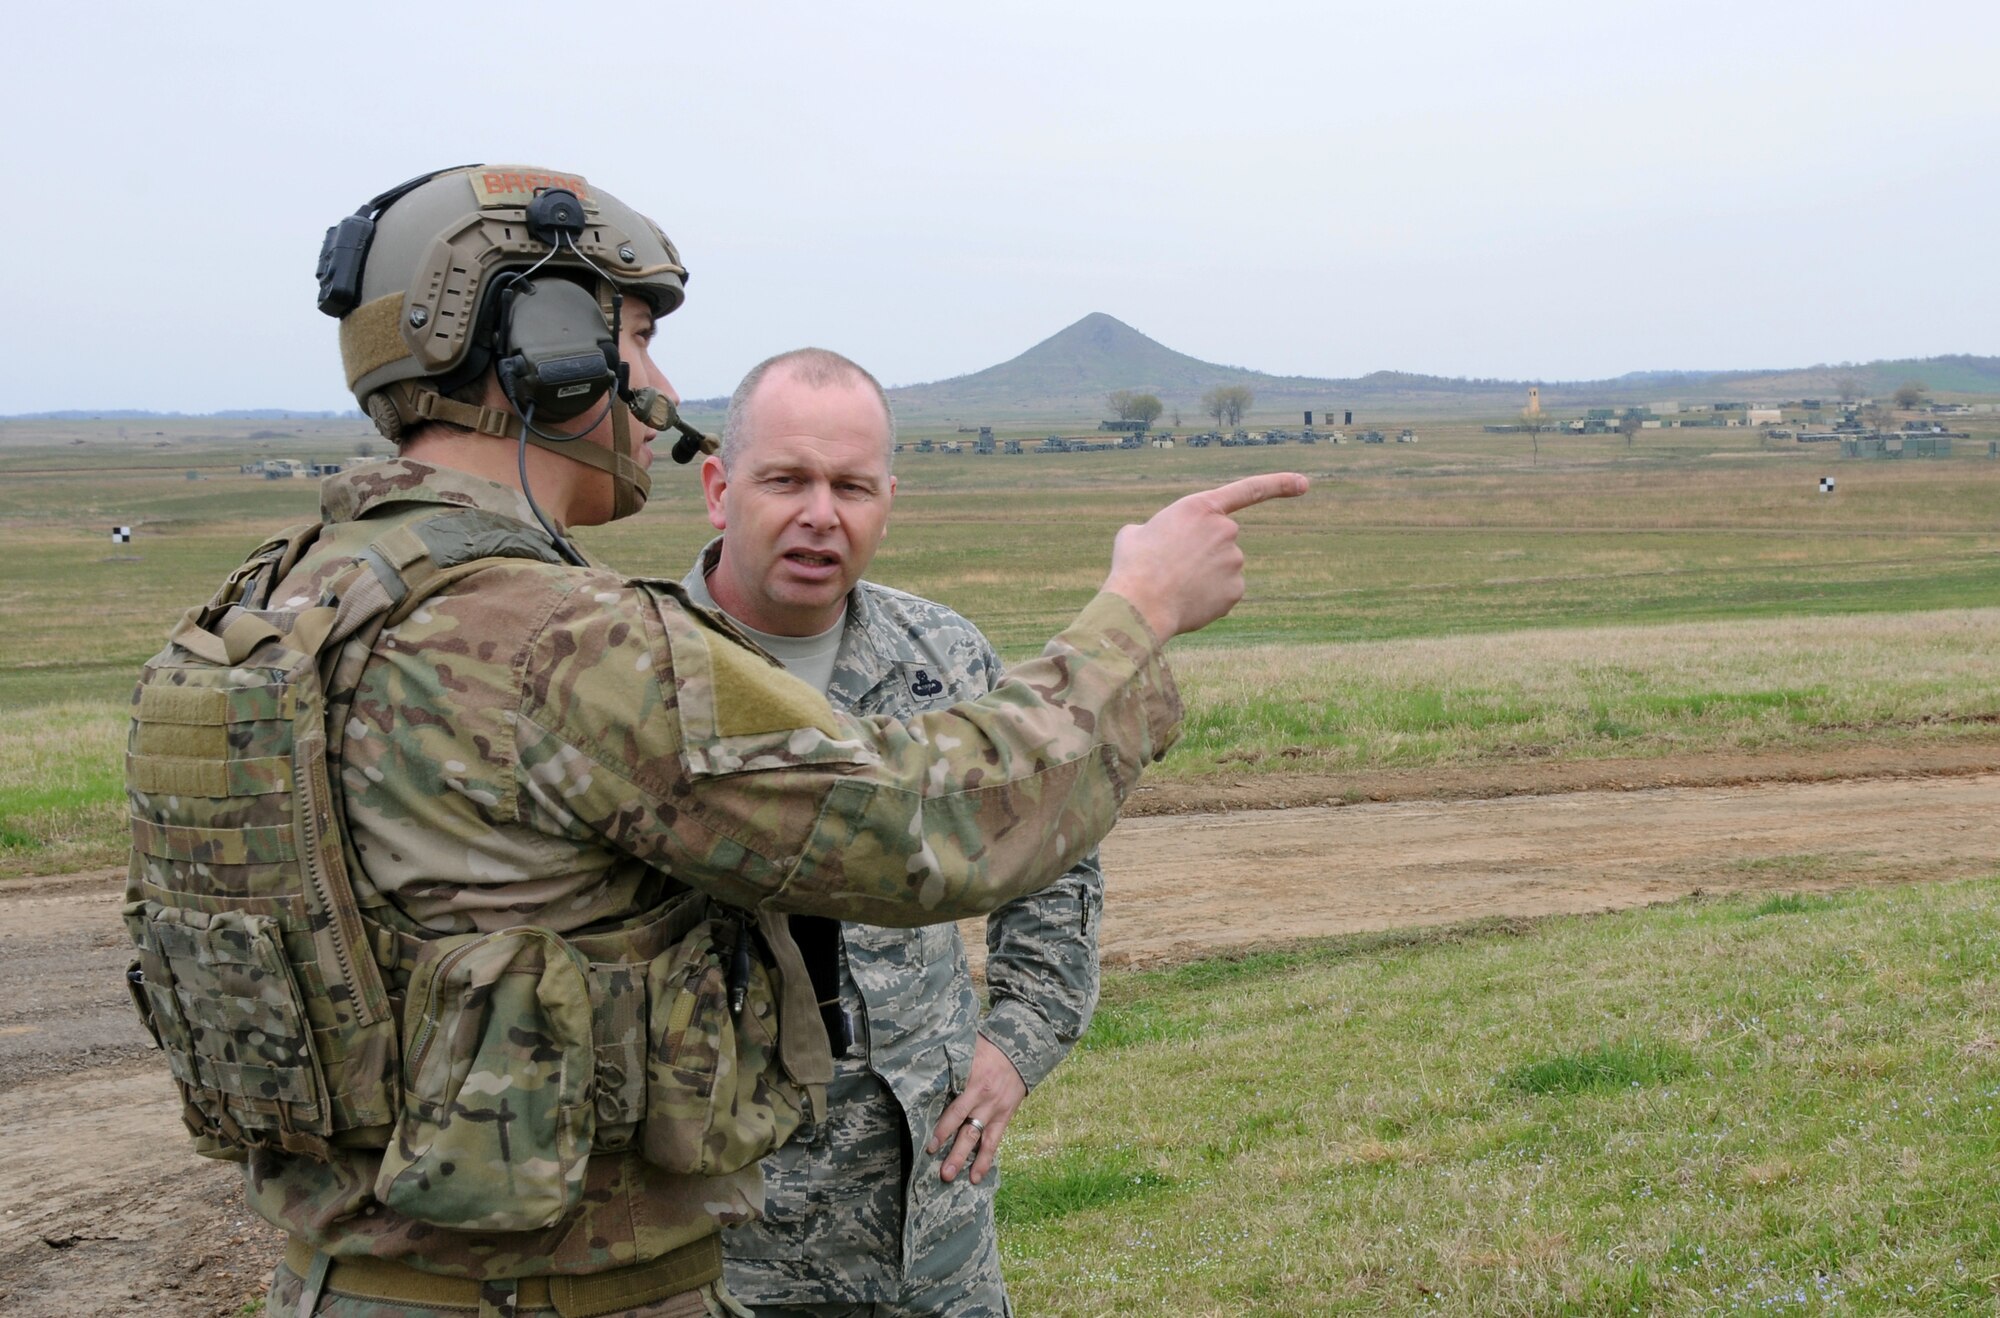 Air National Guard Command Chief Master Sgt. James W. Hotaling speaks with a joint terminal attack controller from the 22nd Special Tactics Squadron during a visit to the 188th Fighter Wing's Detachment 1 Razorback Range April 5, 2014. Hotaling, a former combat controller, met with JTACs to understand the unique training opportunities available at Razorback Range. The 188th’s pilots regularly train with Special Forces JTACs from the U.S. Army Rangers, Air Force Special Operations and Naval Special Warfare teams. (U.S. Air National Guard photo by Senior Airman John Hillier/released)